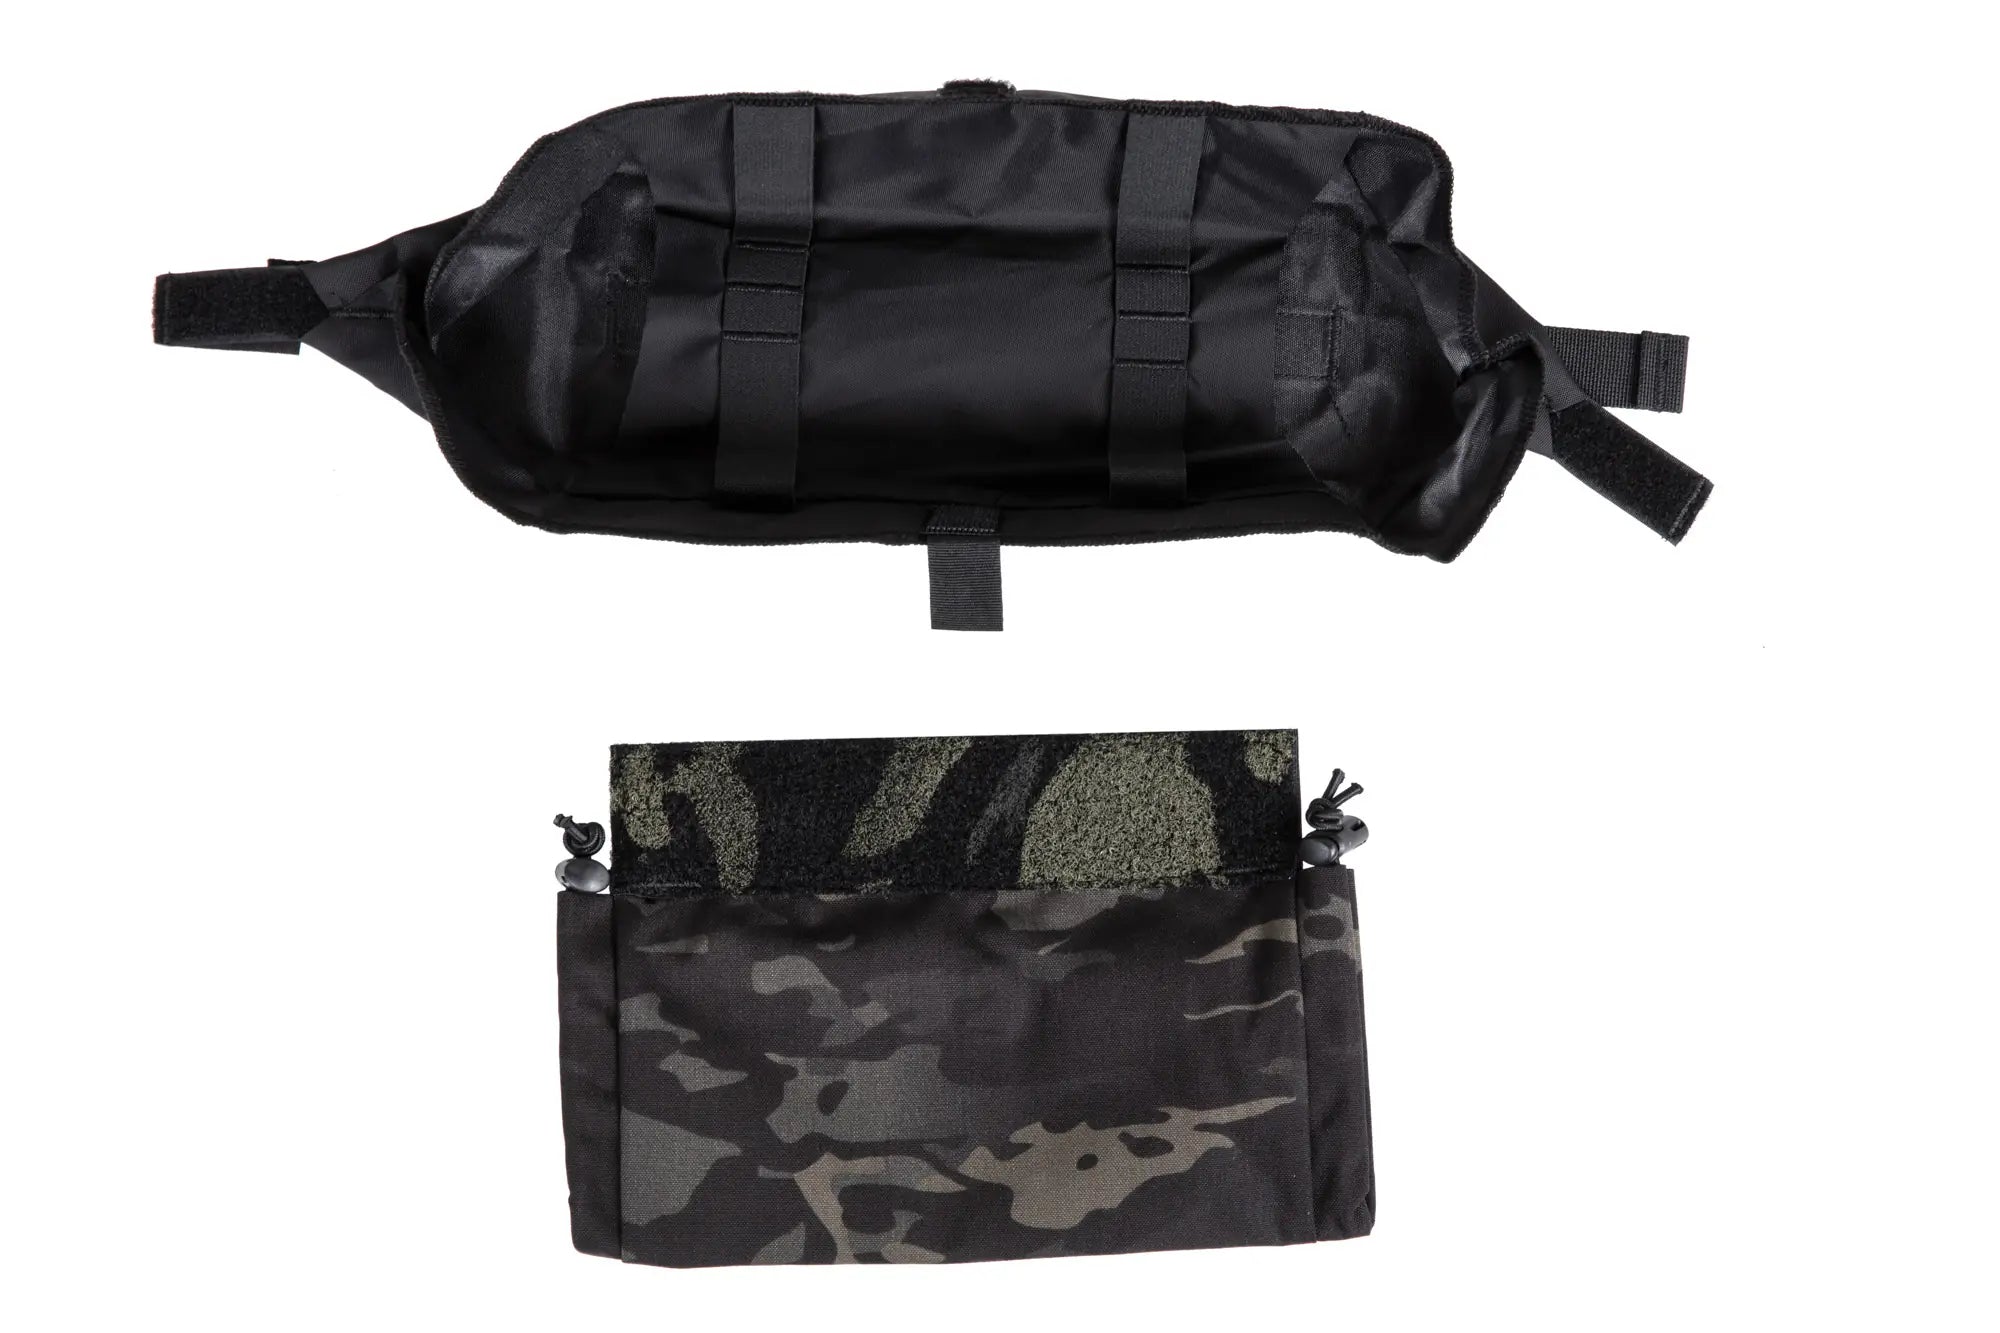 Tactical first aid kit with sleeve Wosport MultiCam Black